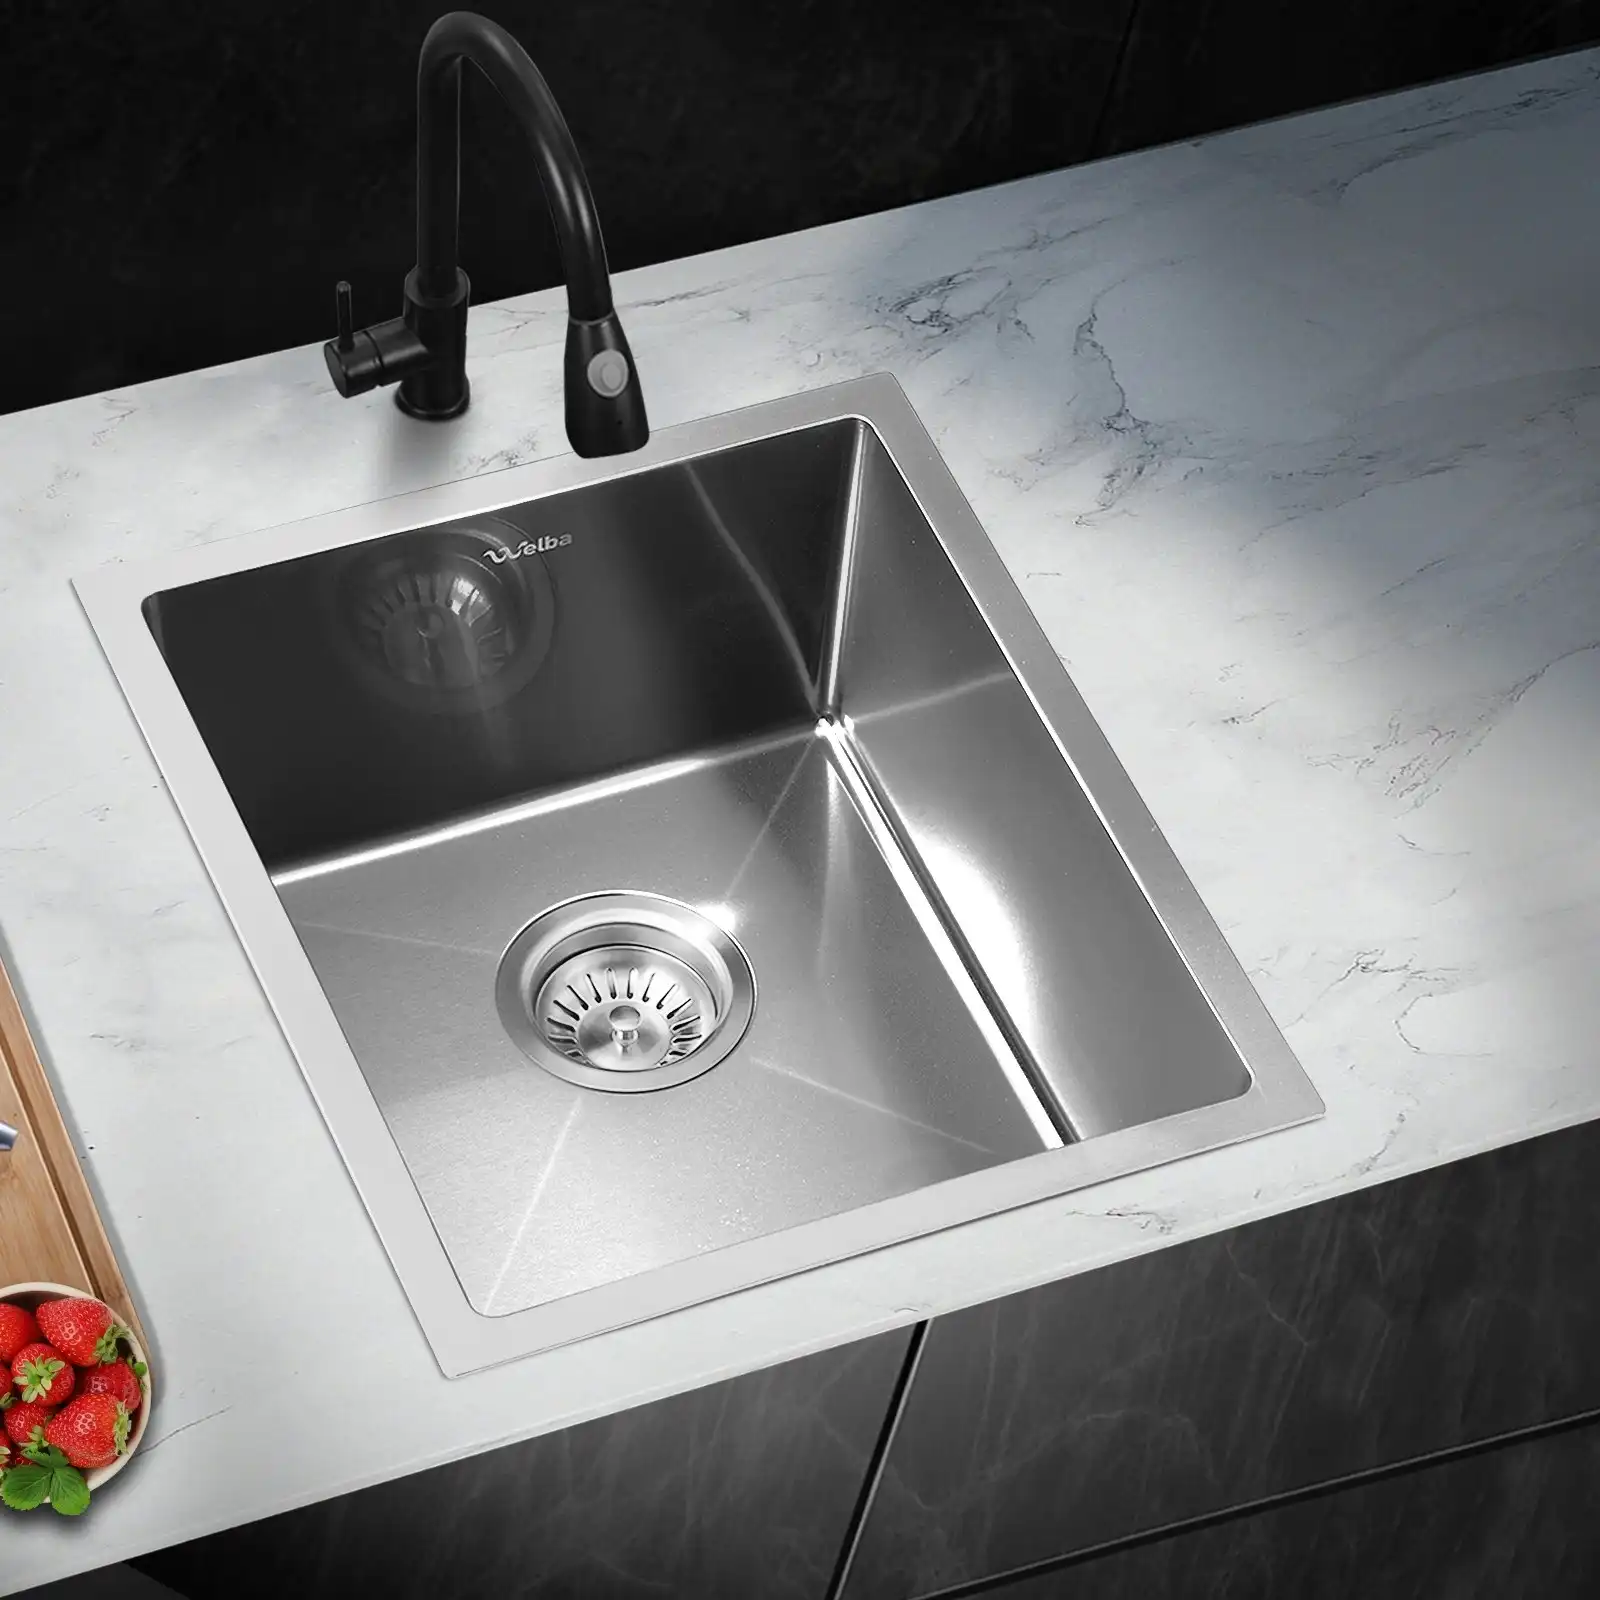 Welba Kitchen Sink 38X44CM Stainless Steel Single Bowl Basin With Waste Silver